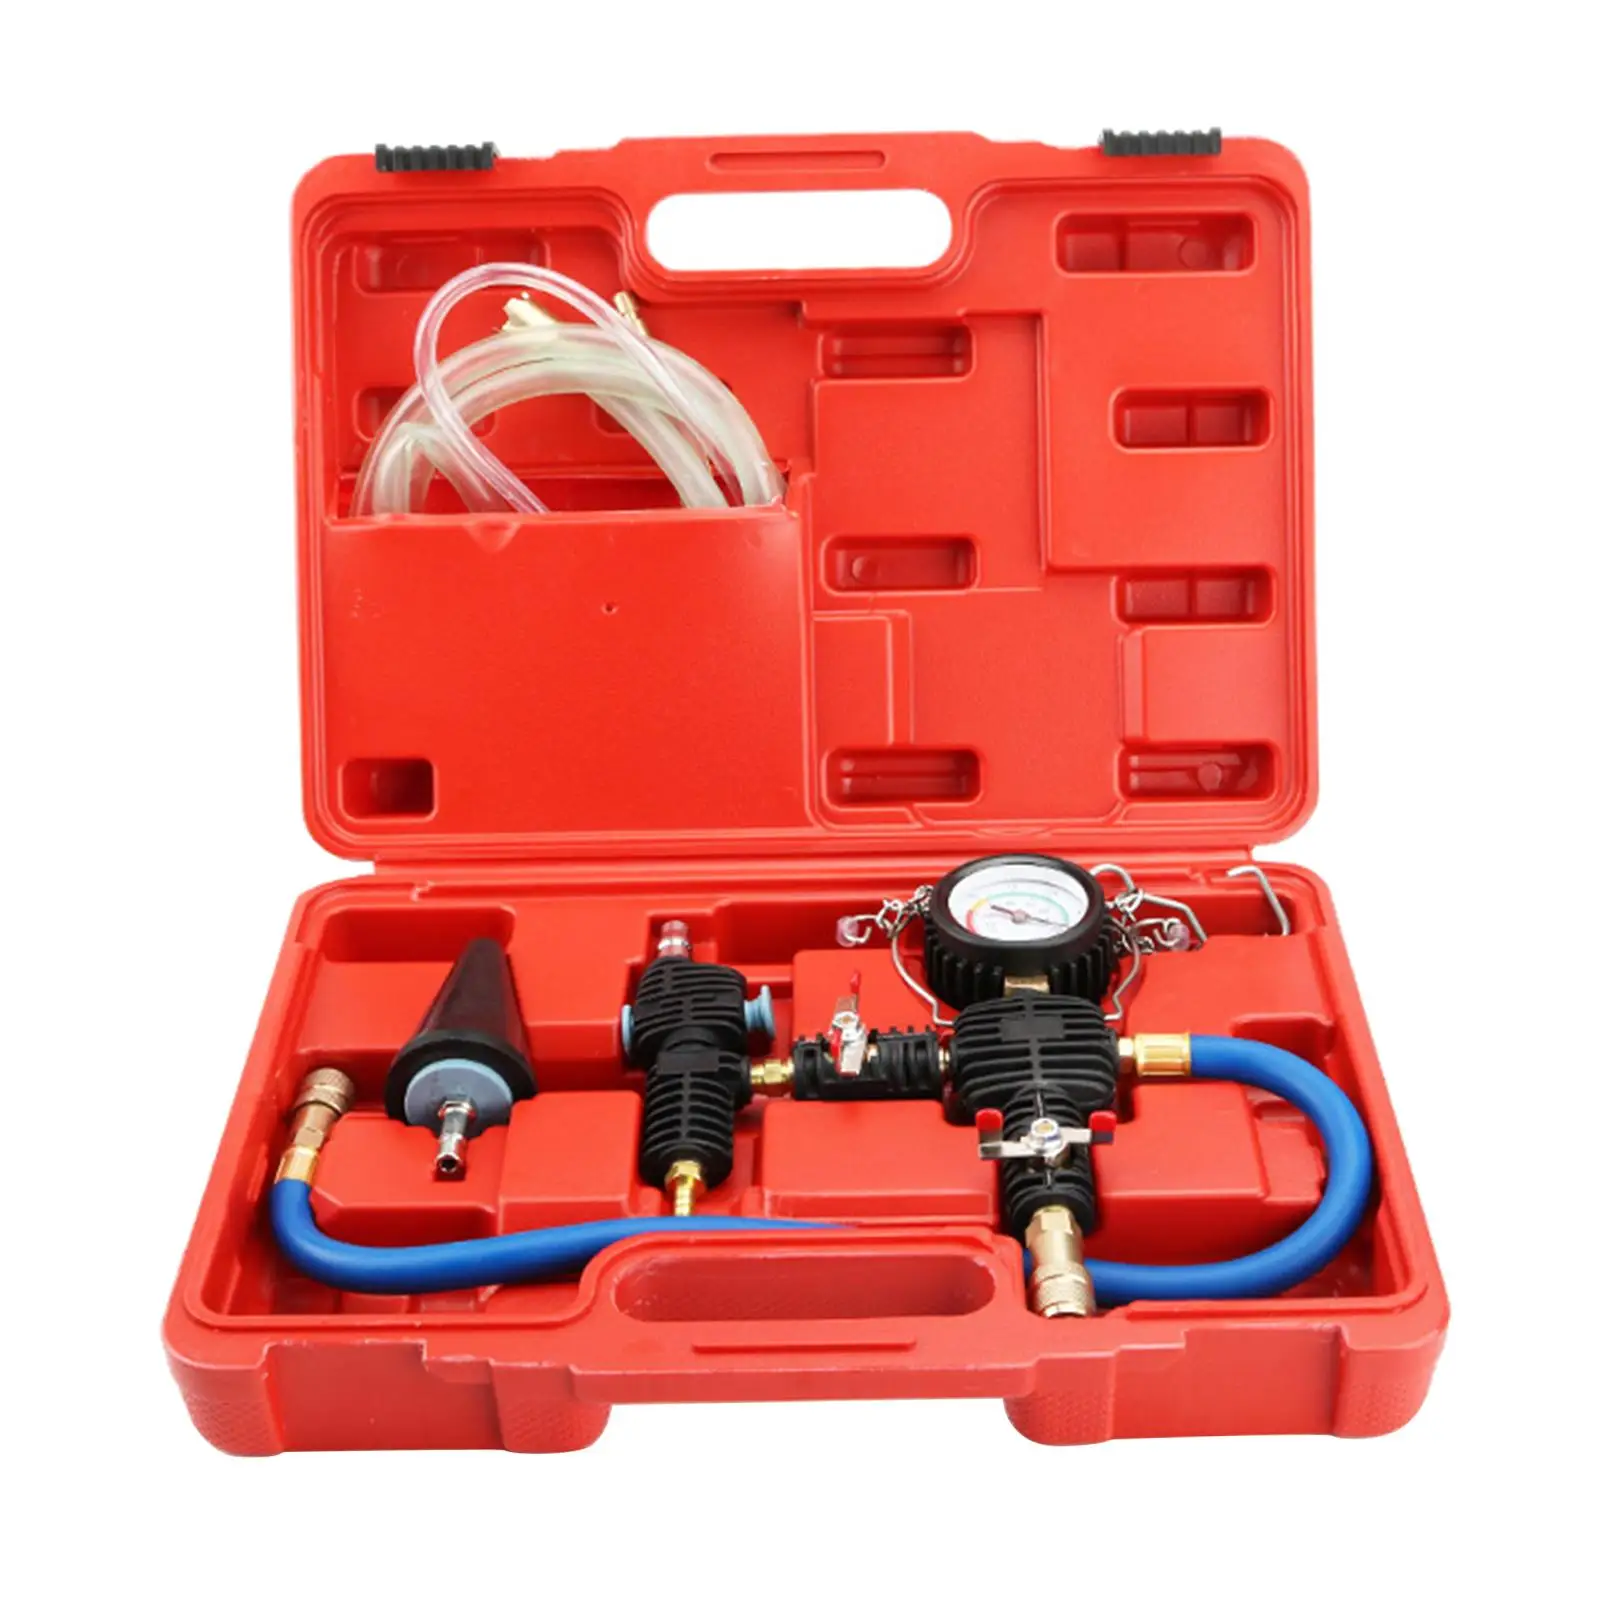 Vacuum Purge Coolant Refill Tool Water Tank Vacuum Antifreeze Filler Set Replace Tool Set with Hose for Automotive SUV Car Truck